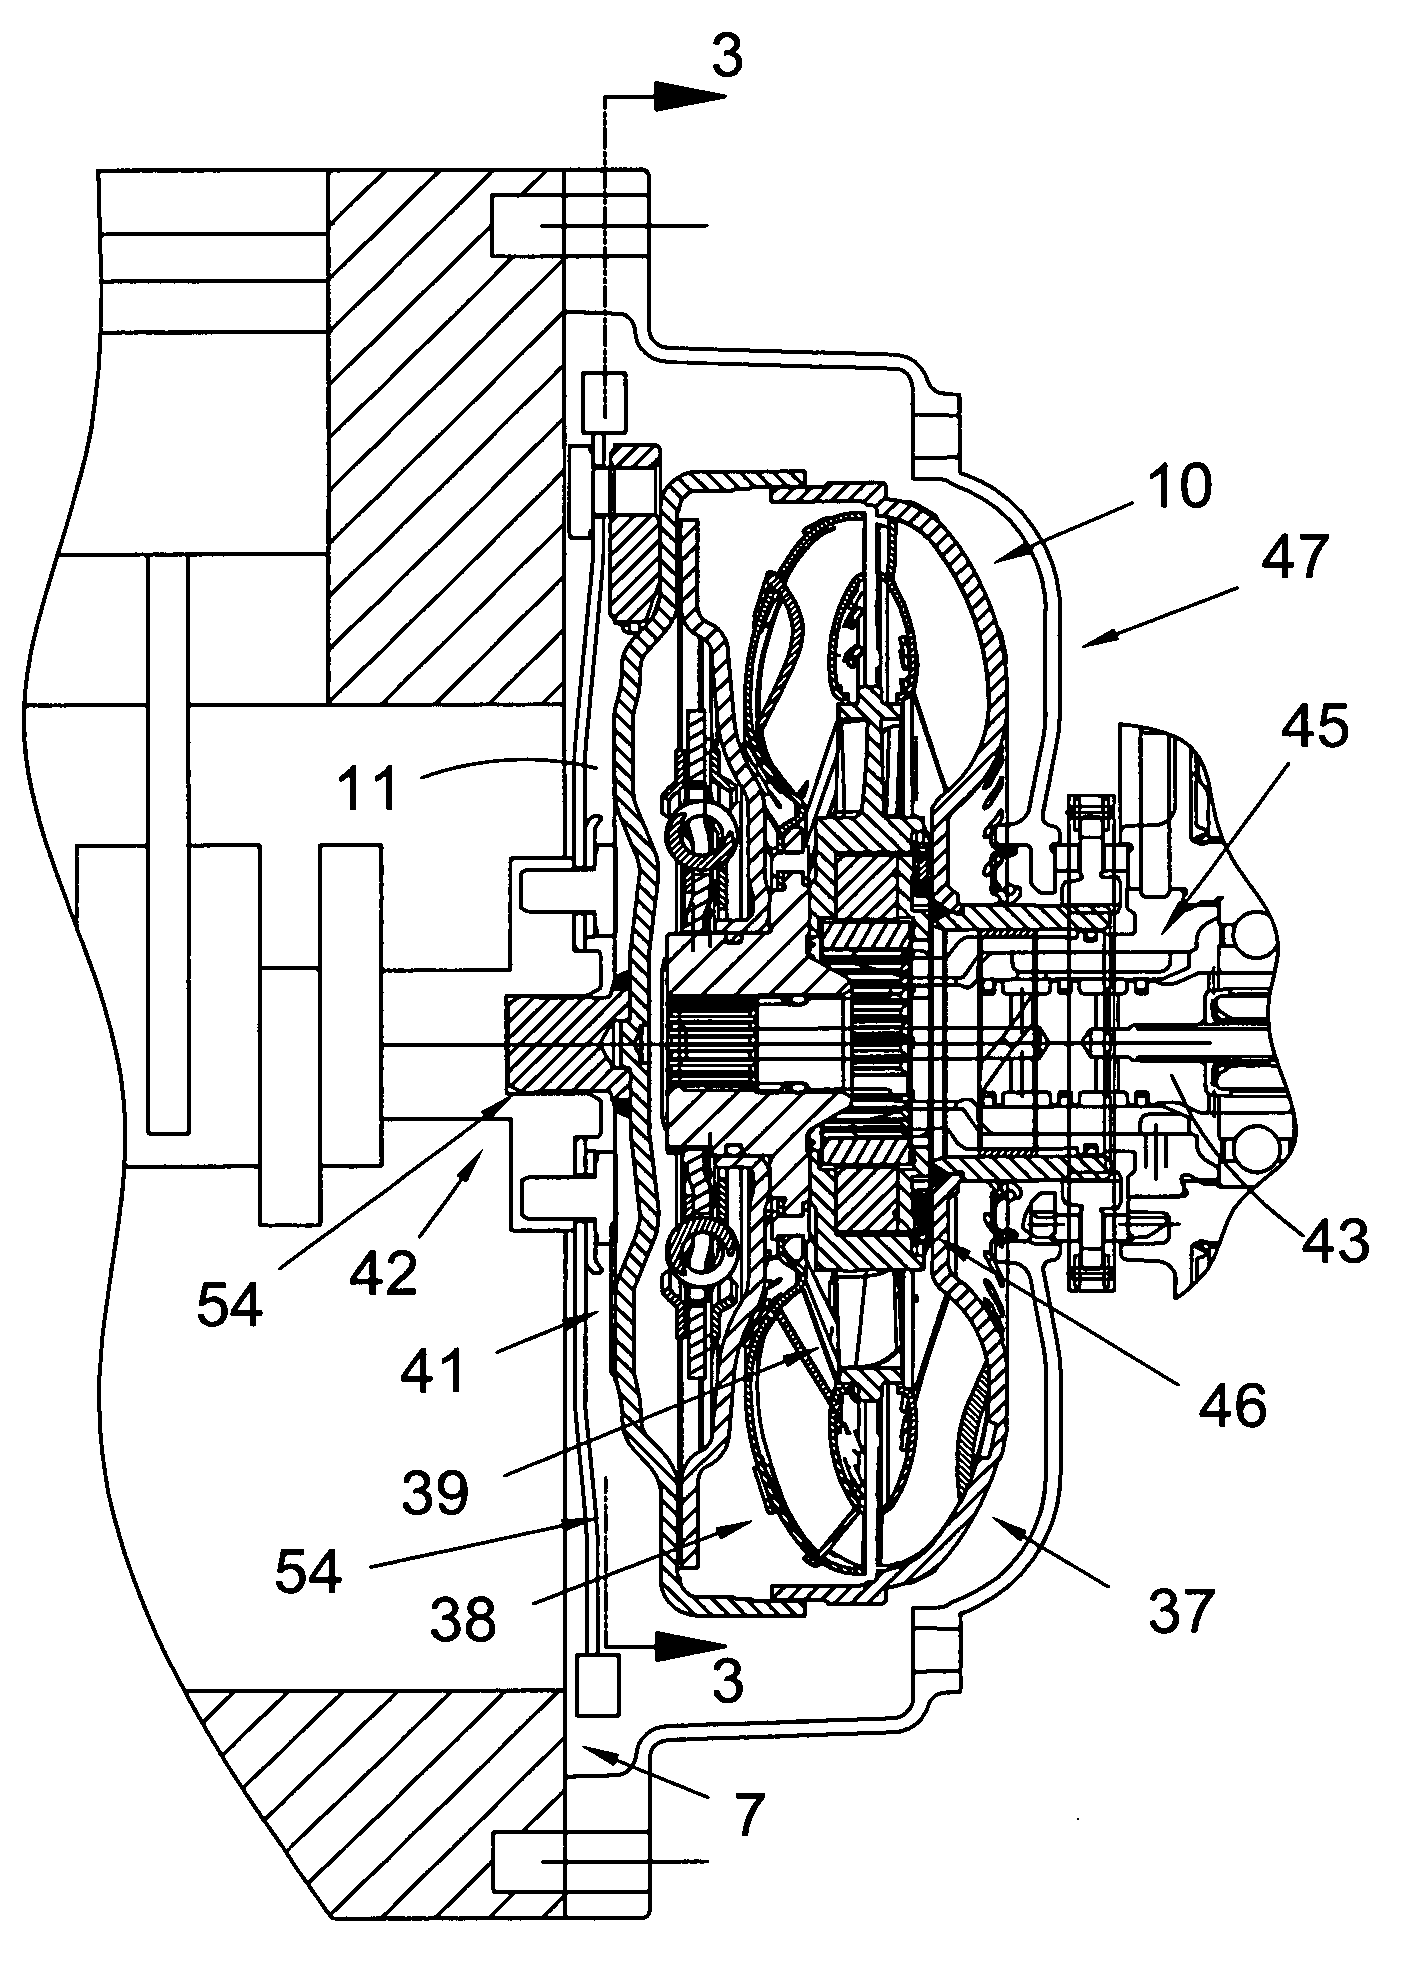 Multi-function torque converter with a sealed impeller clutch apply chamber and method of forming and operating a multi-function torque converter